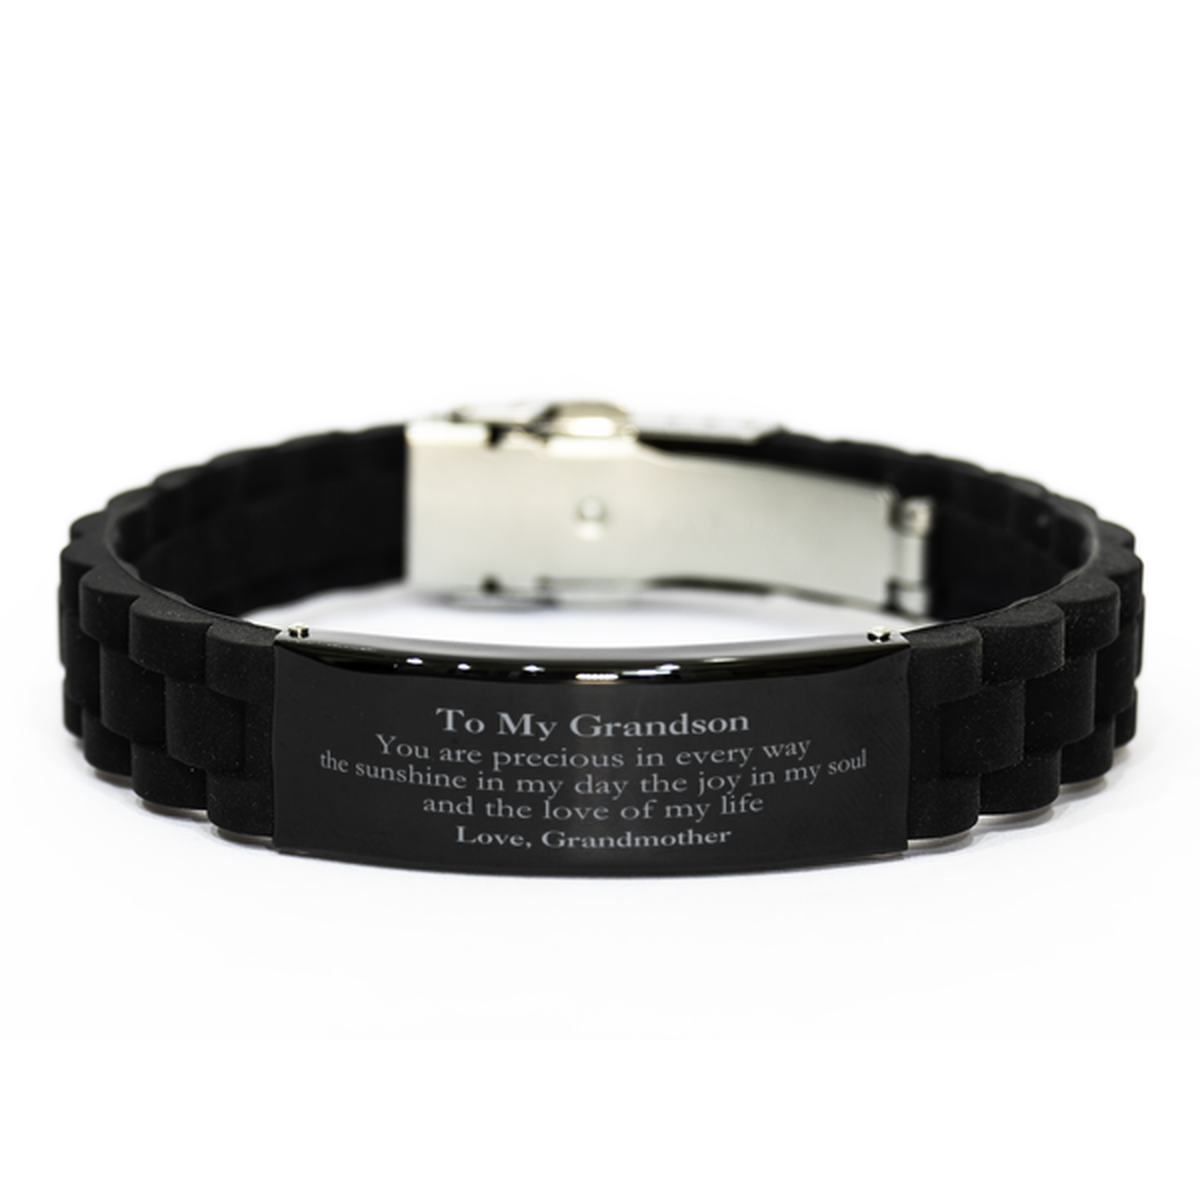 Graduation Gifts for Grandson Black Glidelock Clasp Bracelet Present from Grandmother, Christmas Grandson Birthday Gifts Grandson You are precious in every way the sunshine in my day. Love, Grandmother